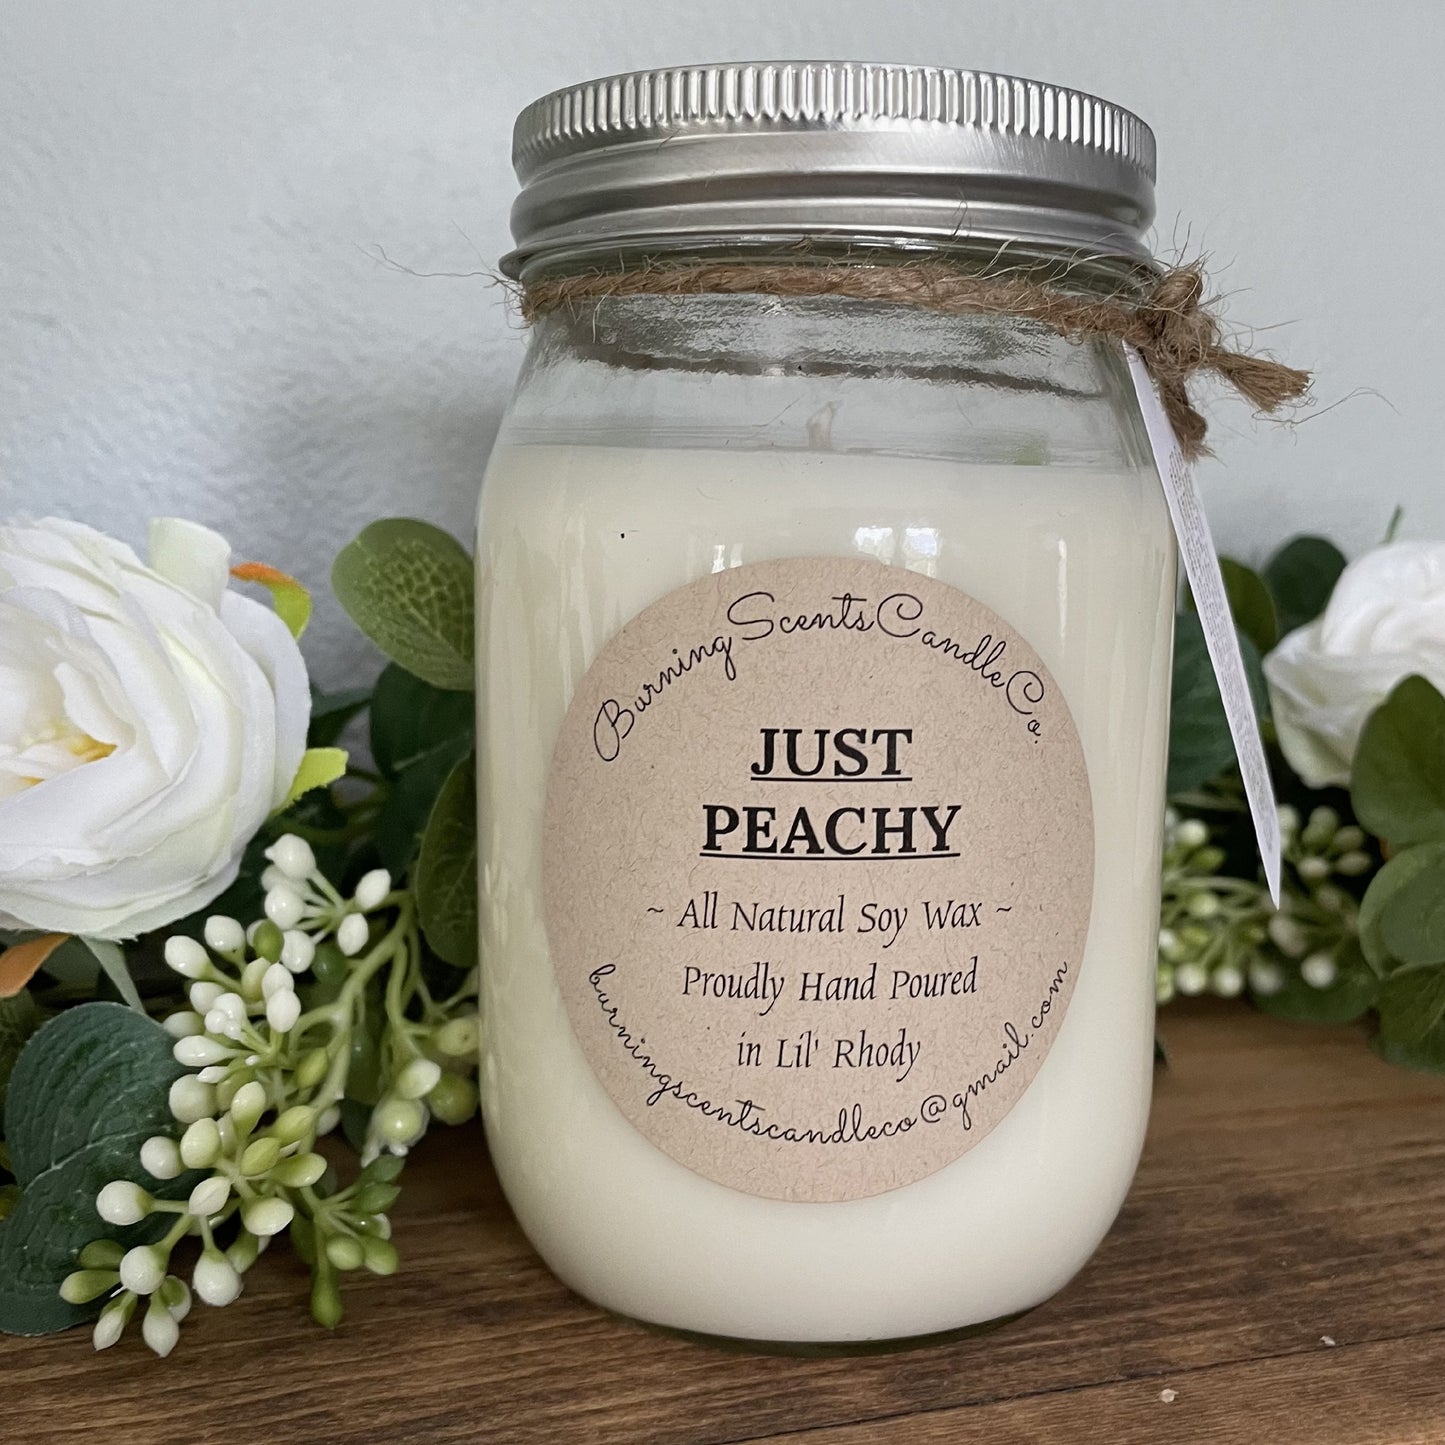 Hand Poured Soy Wax Candle- Just Peachy